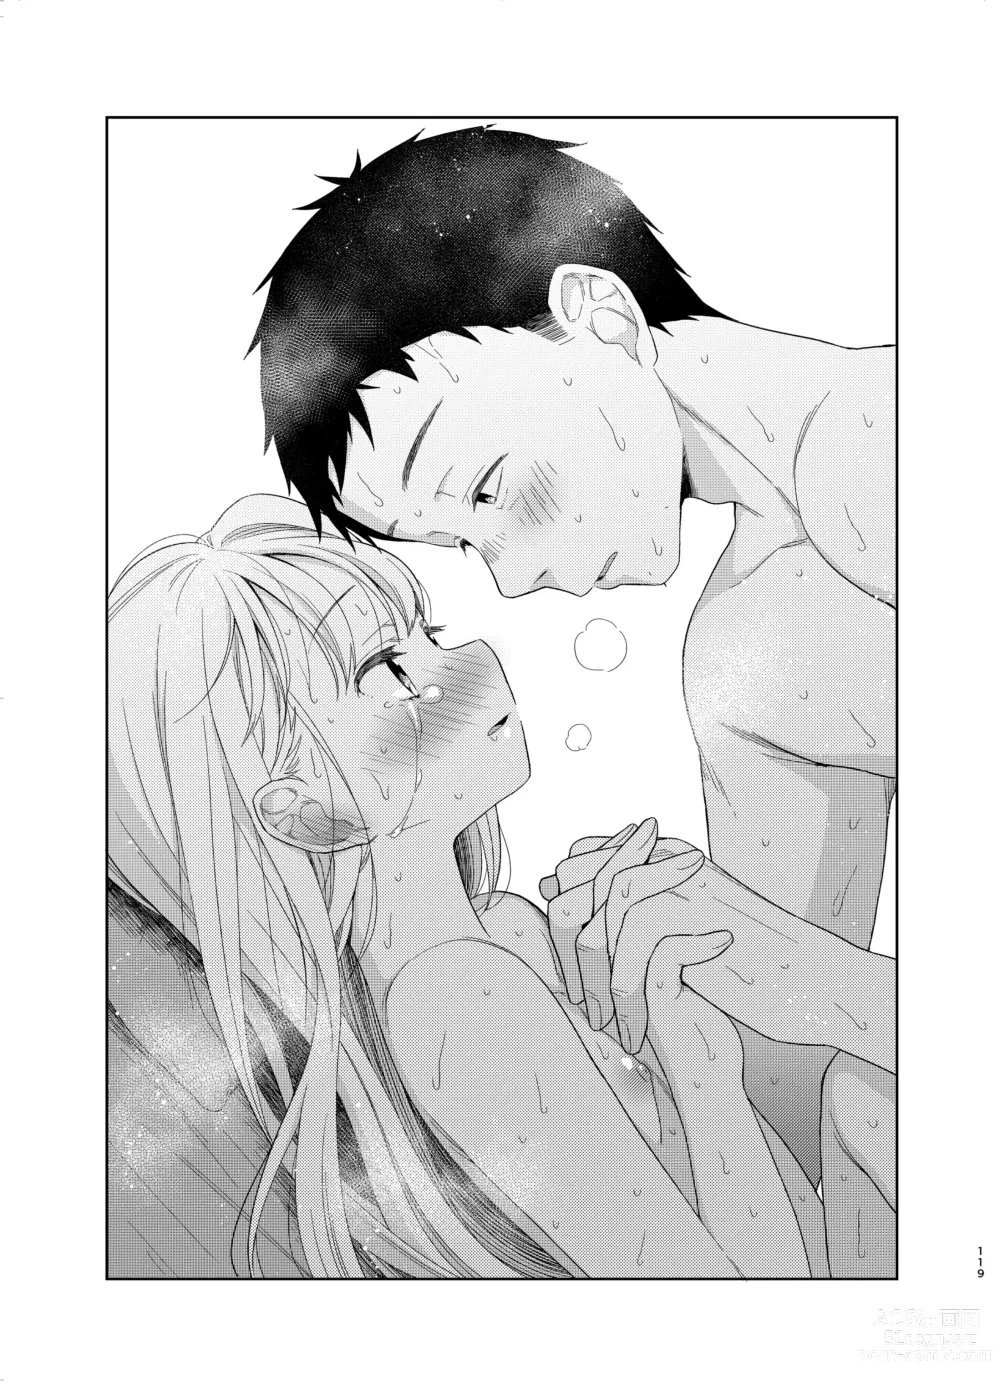 Page 117 of doujinshi TS소녀 하루키 군 5